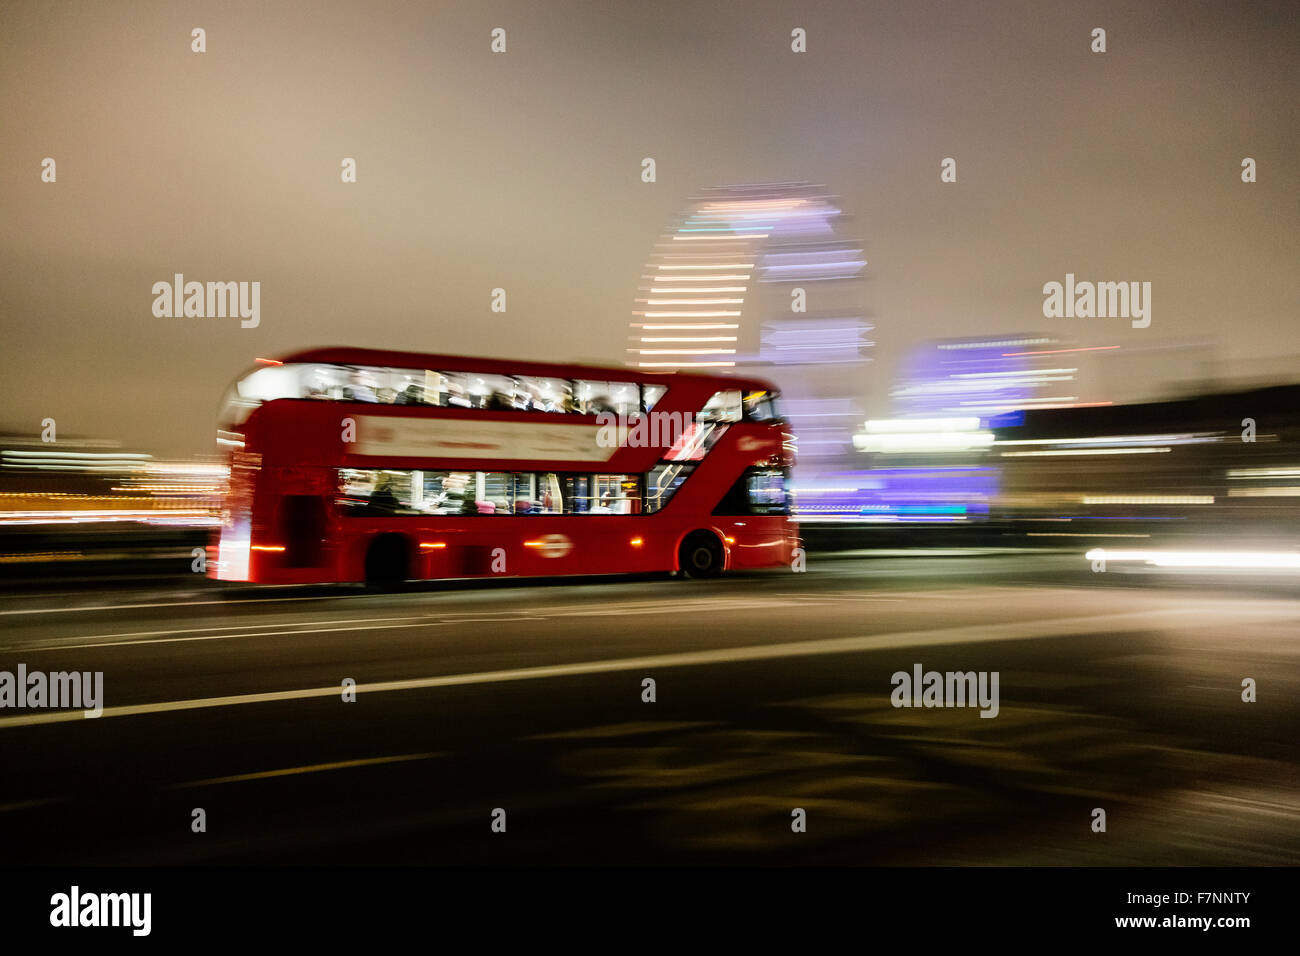 UK, London, driving double-decker bus at night Stock Photo